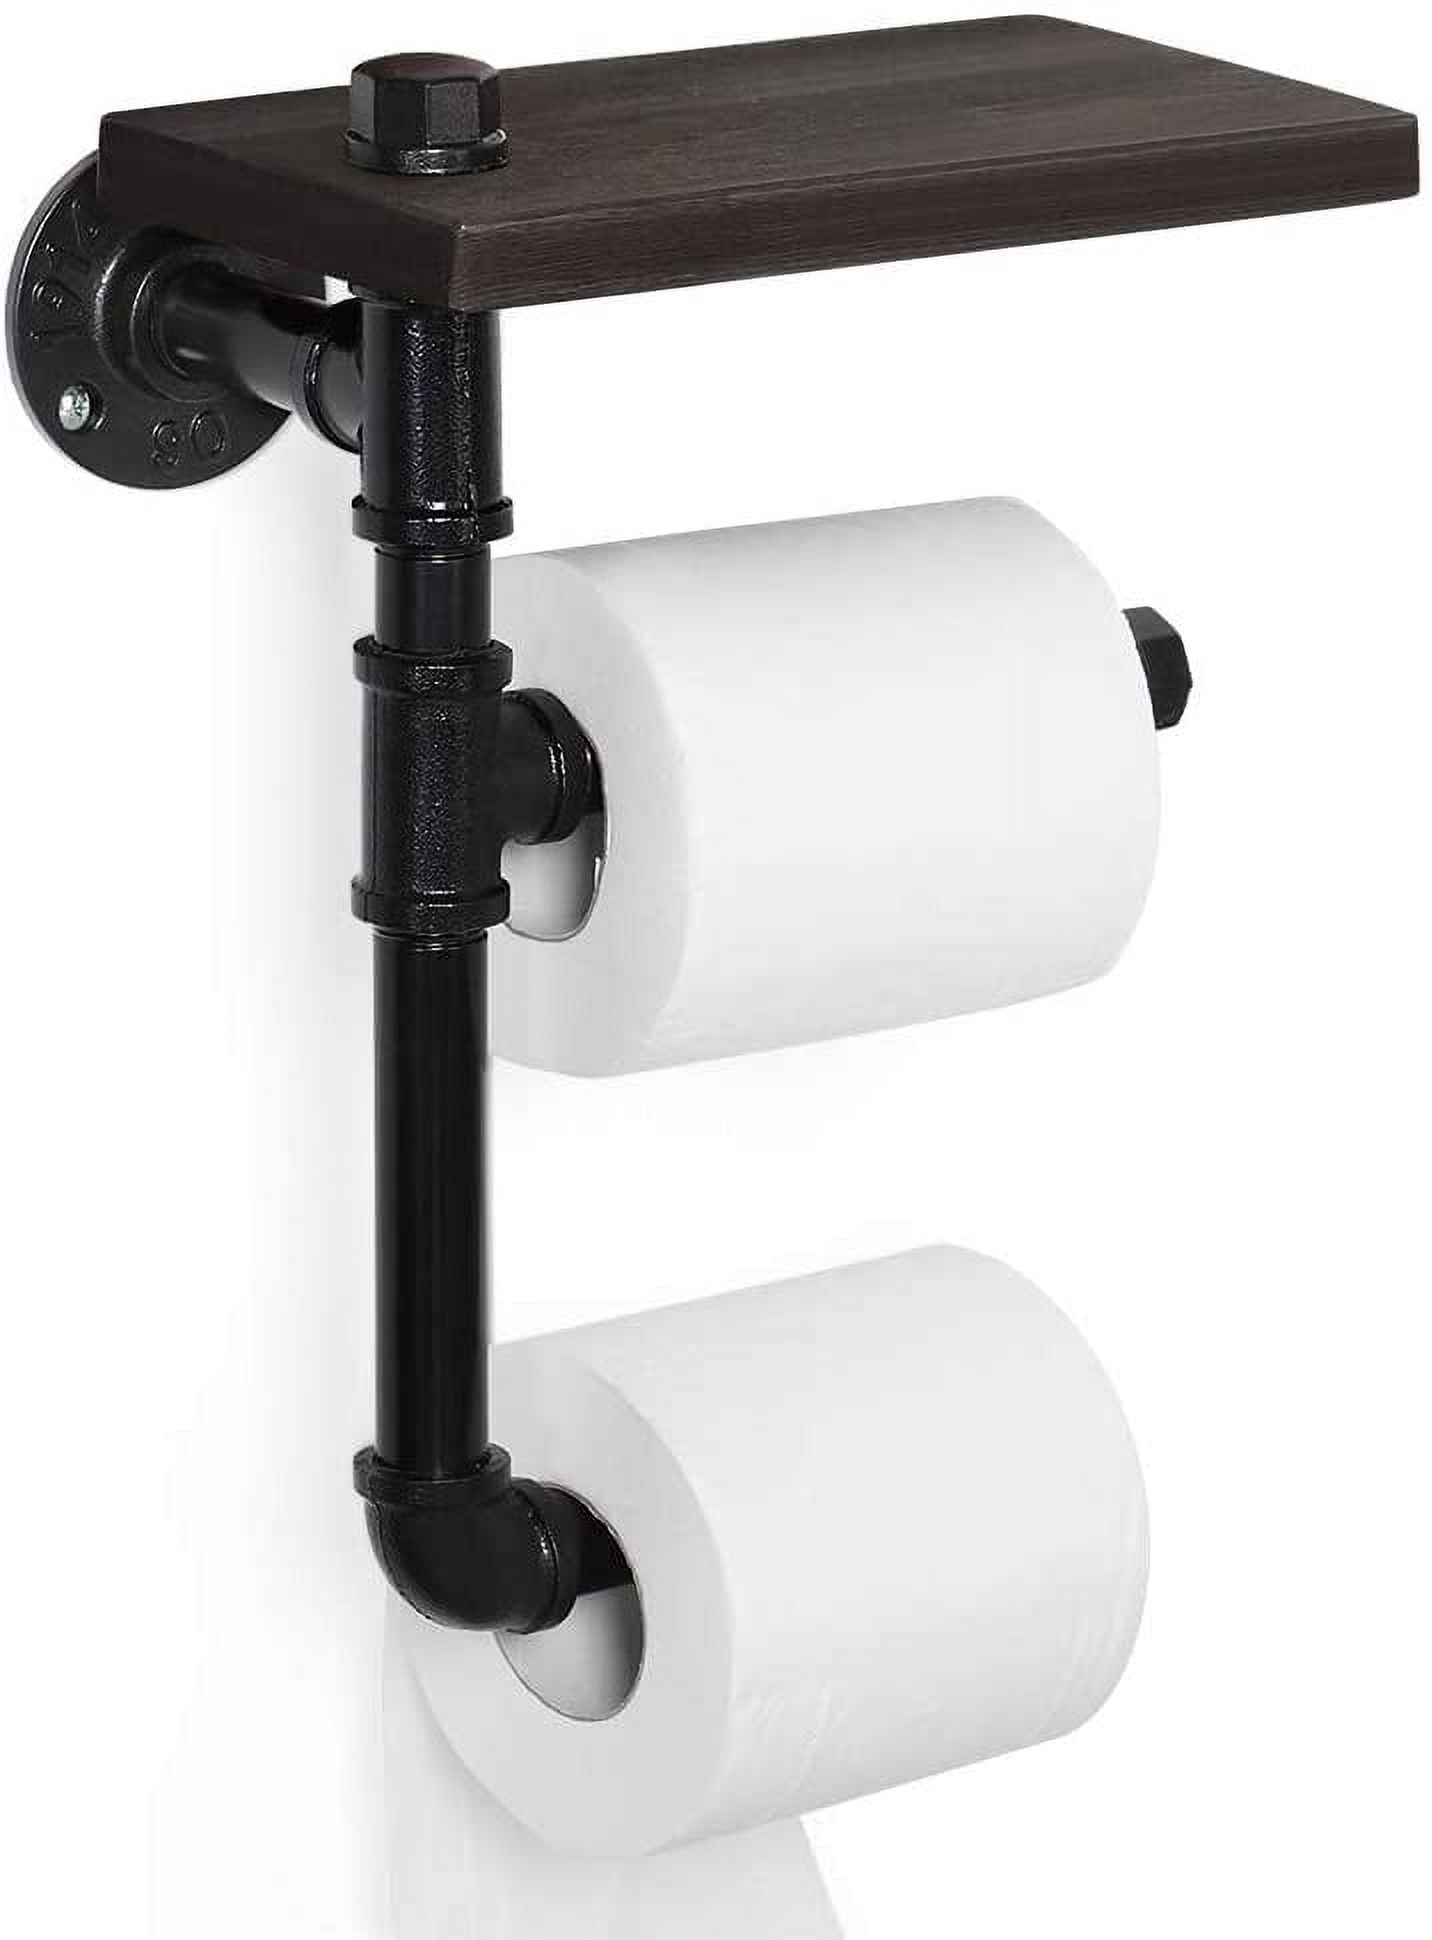 Oumilen Wall Mounted Paper Towel Holder with Wood Shelf, Light Brown